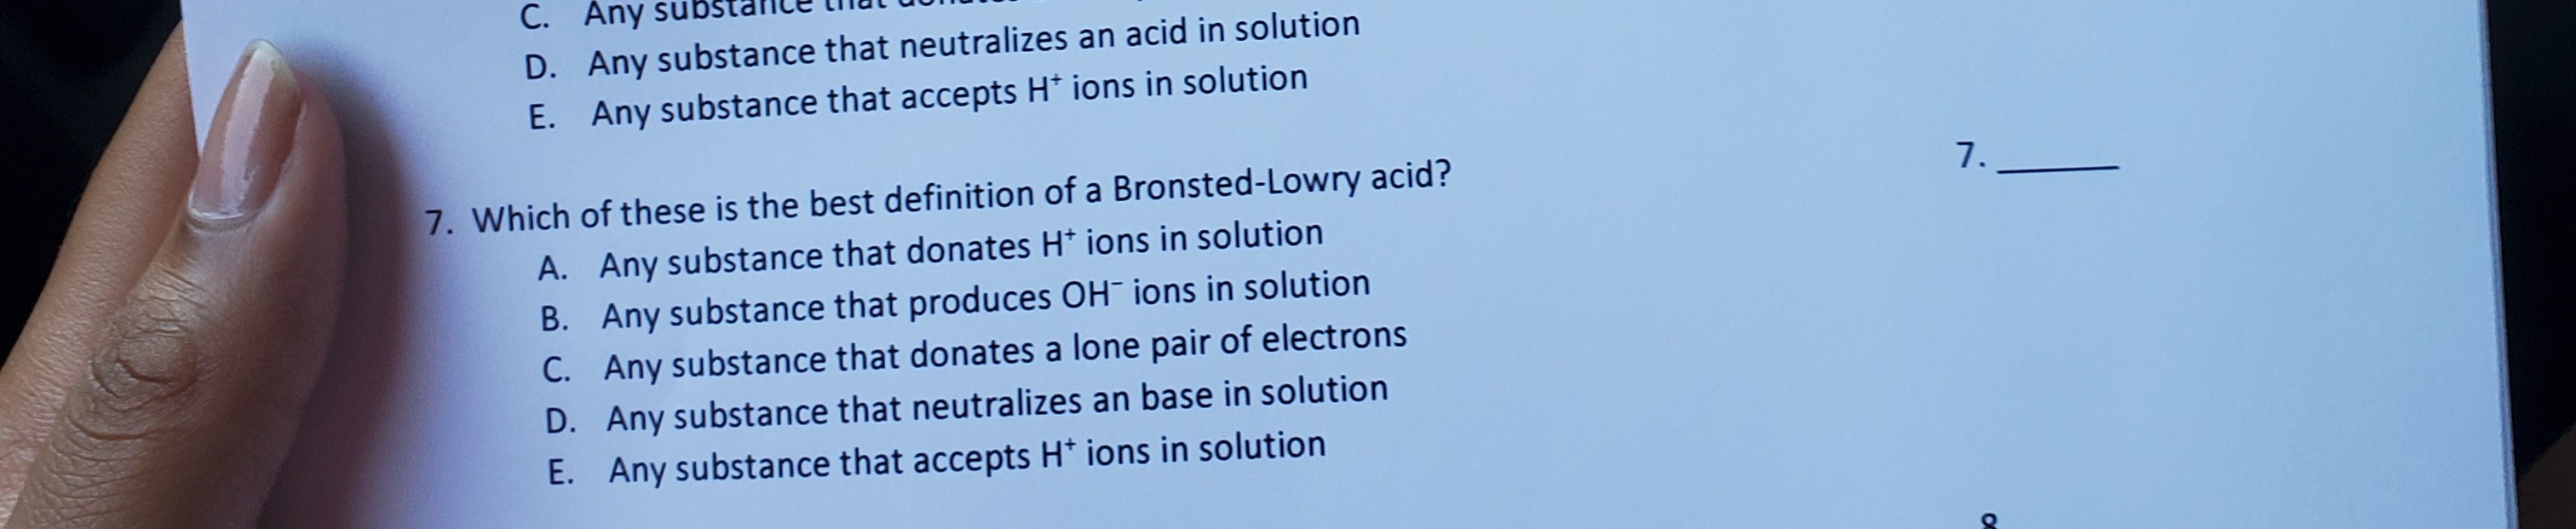 7. Which of these is the best definition of a Bronsted-Lowry acid?
A. Any substance that donates H* ions in solution
B. Any substance that produces OH¯ ions in solution
C. Any substance that donates a lone pair of electrons
D. Any substance that neutralizes an base in solution
E. Any substance that accepts H* ions in solution
